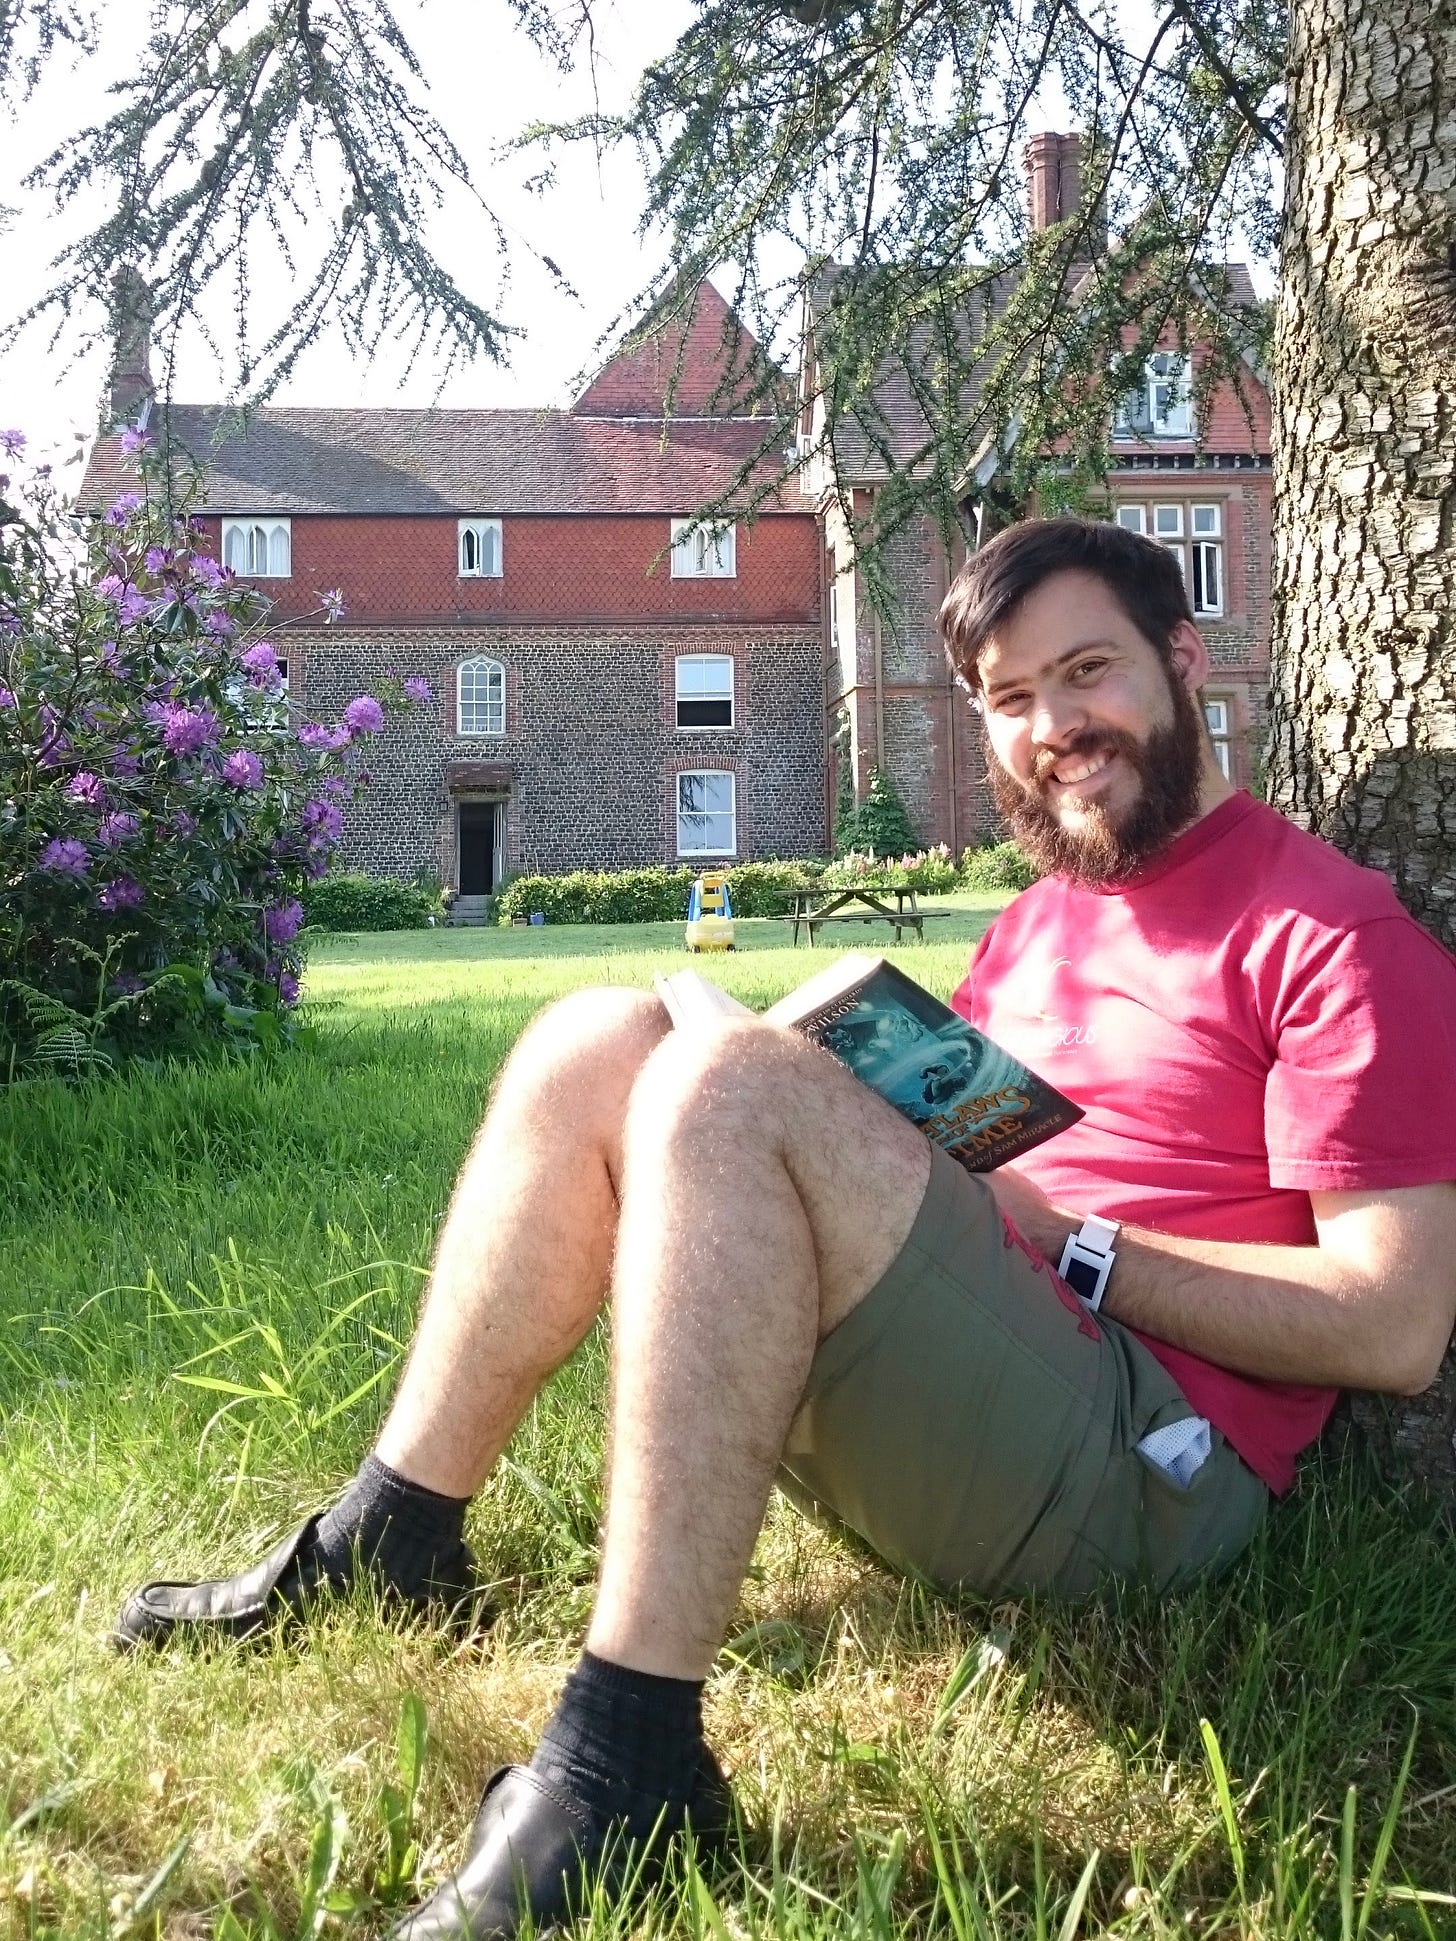 I'm sitting under a tree reading a book, with the historic Manor House that homes L'Abri Fellowship in the background.